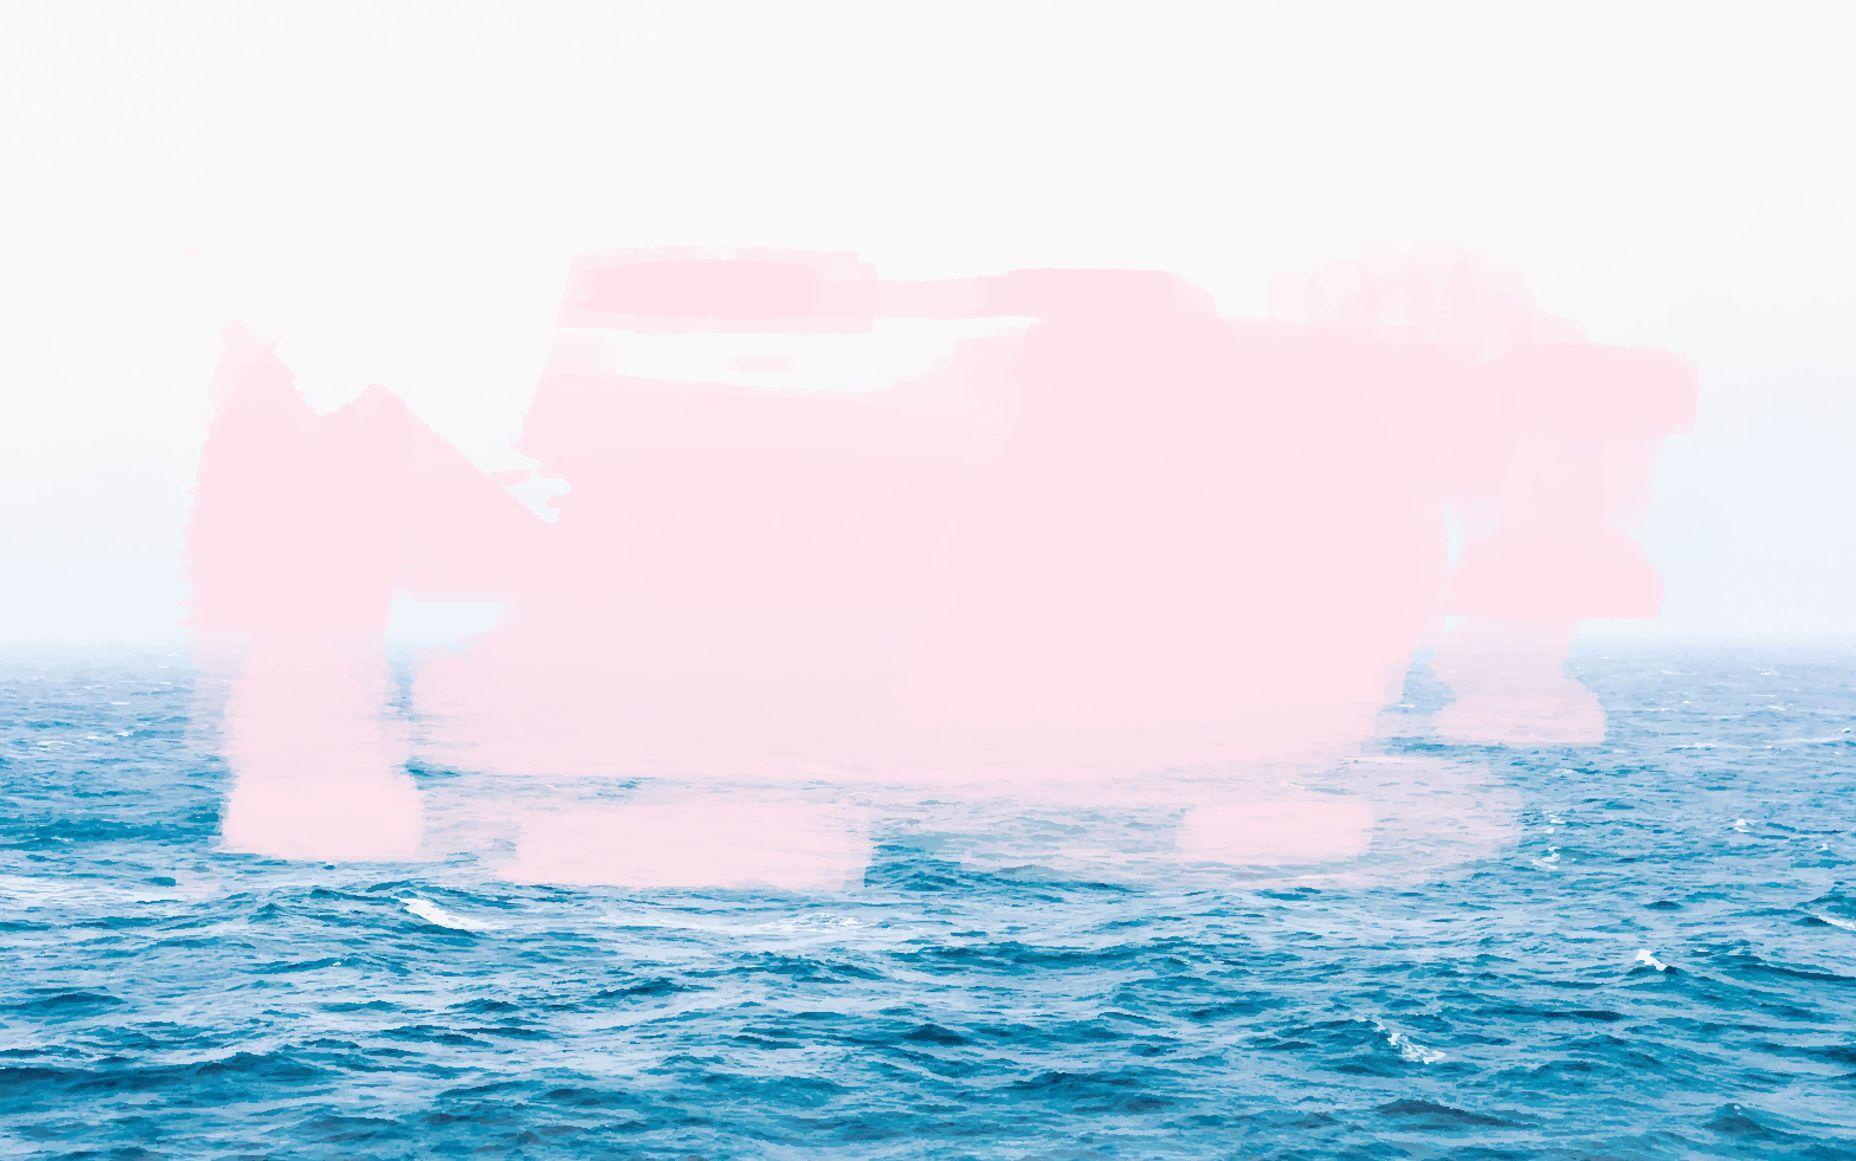 A pink and blue painting on the water - Ocean